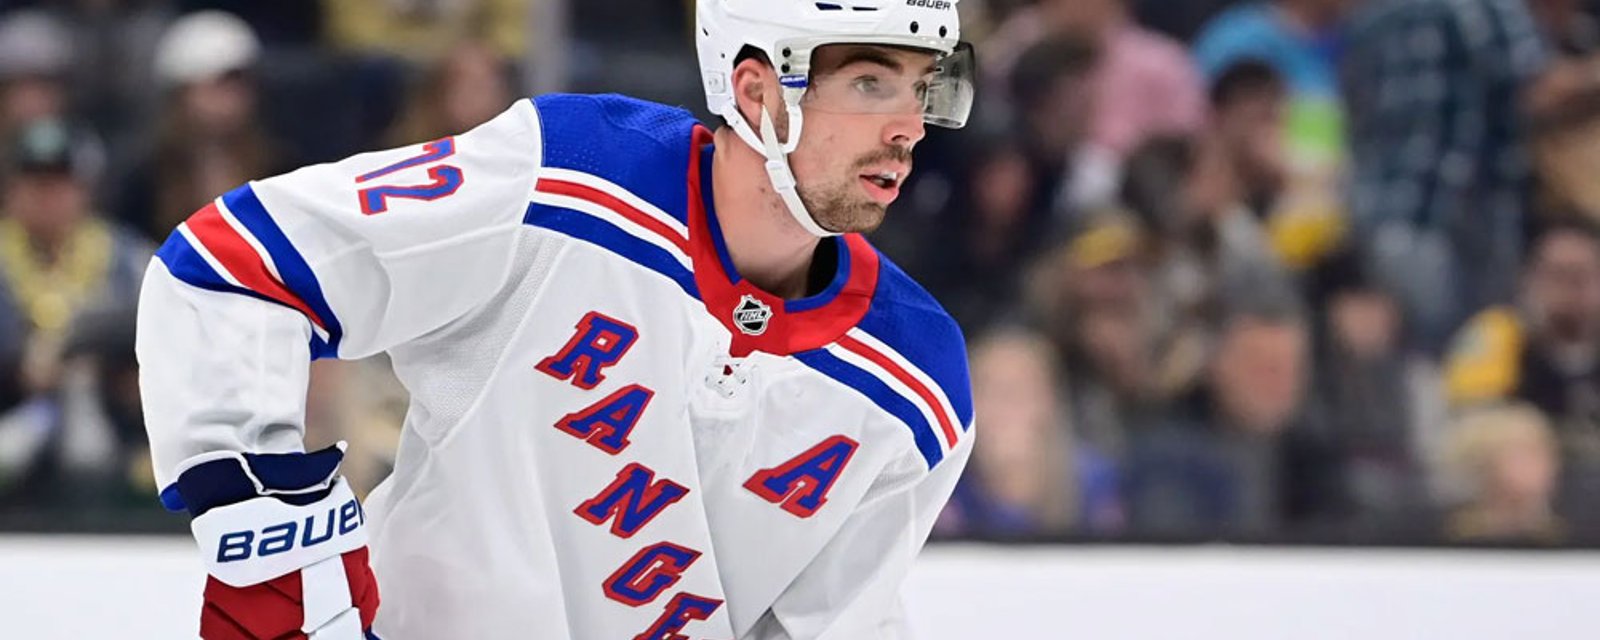 Report: Chytil is in for Game 5